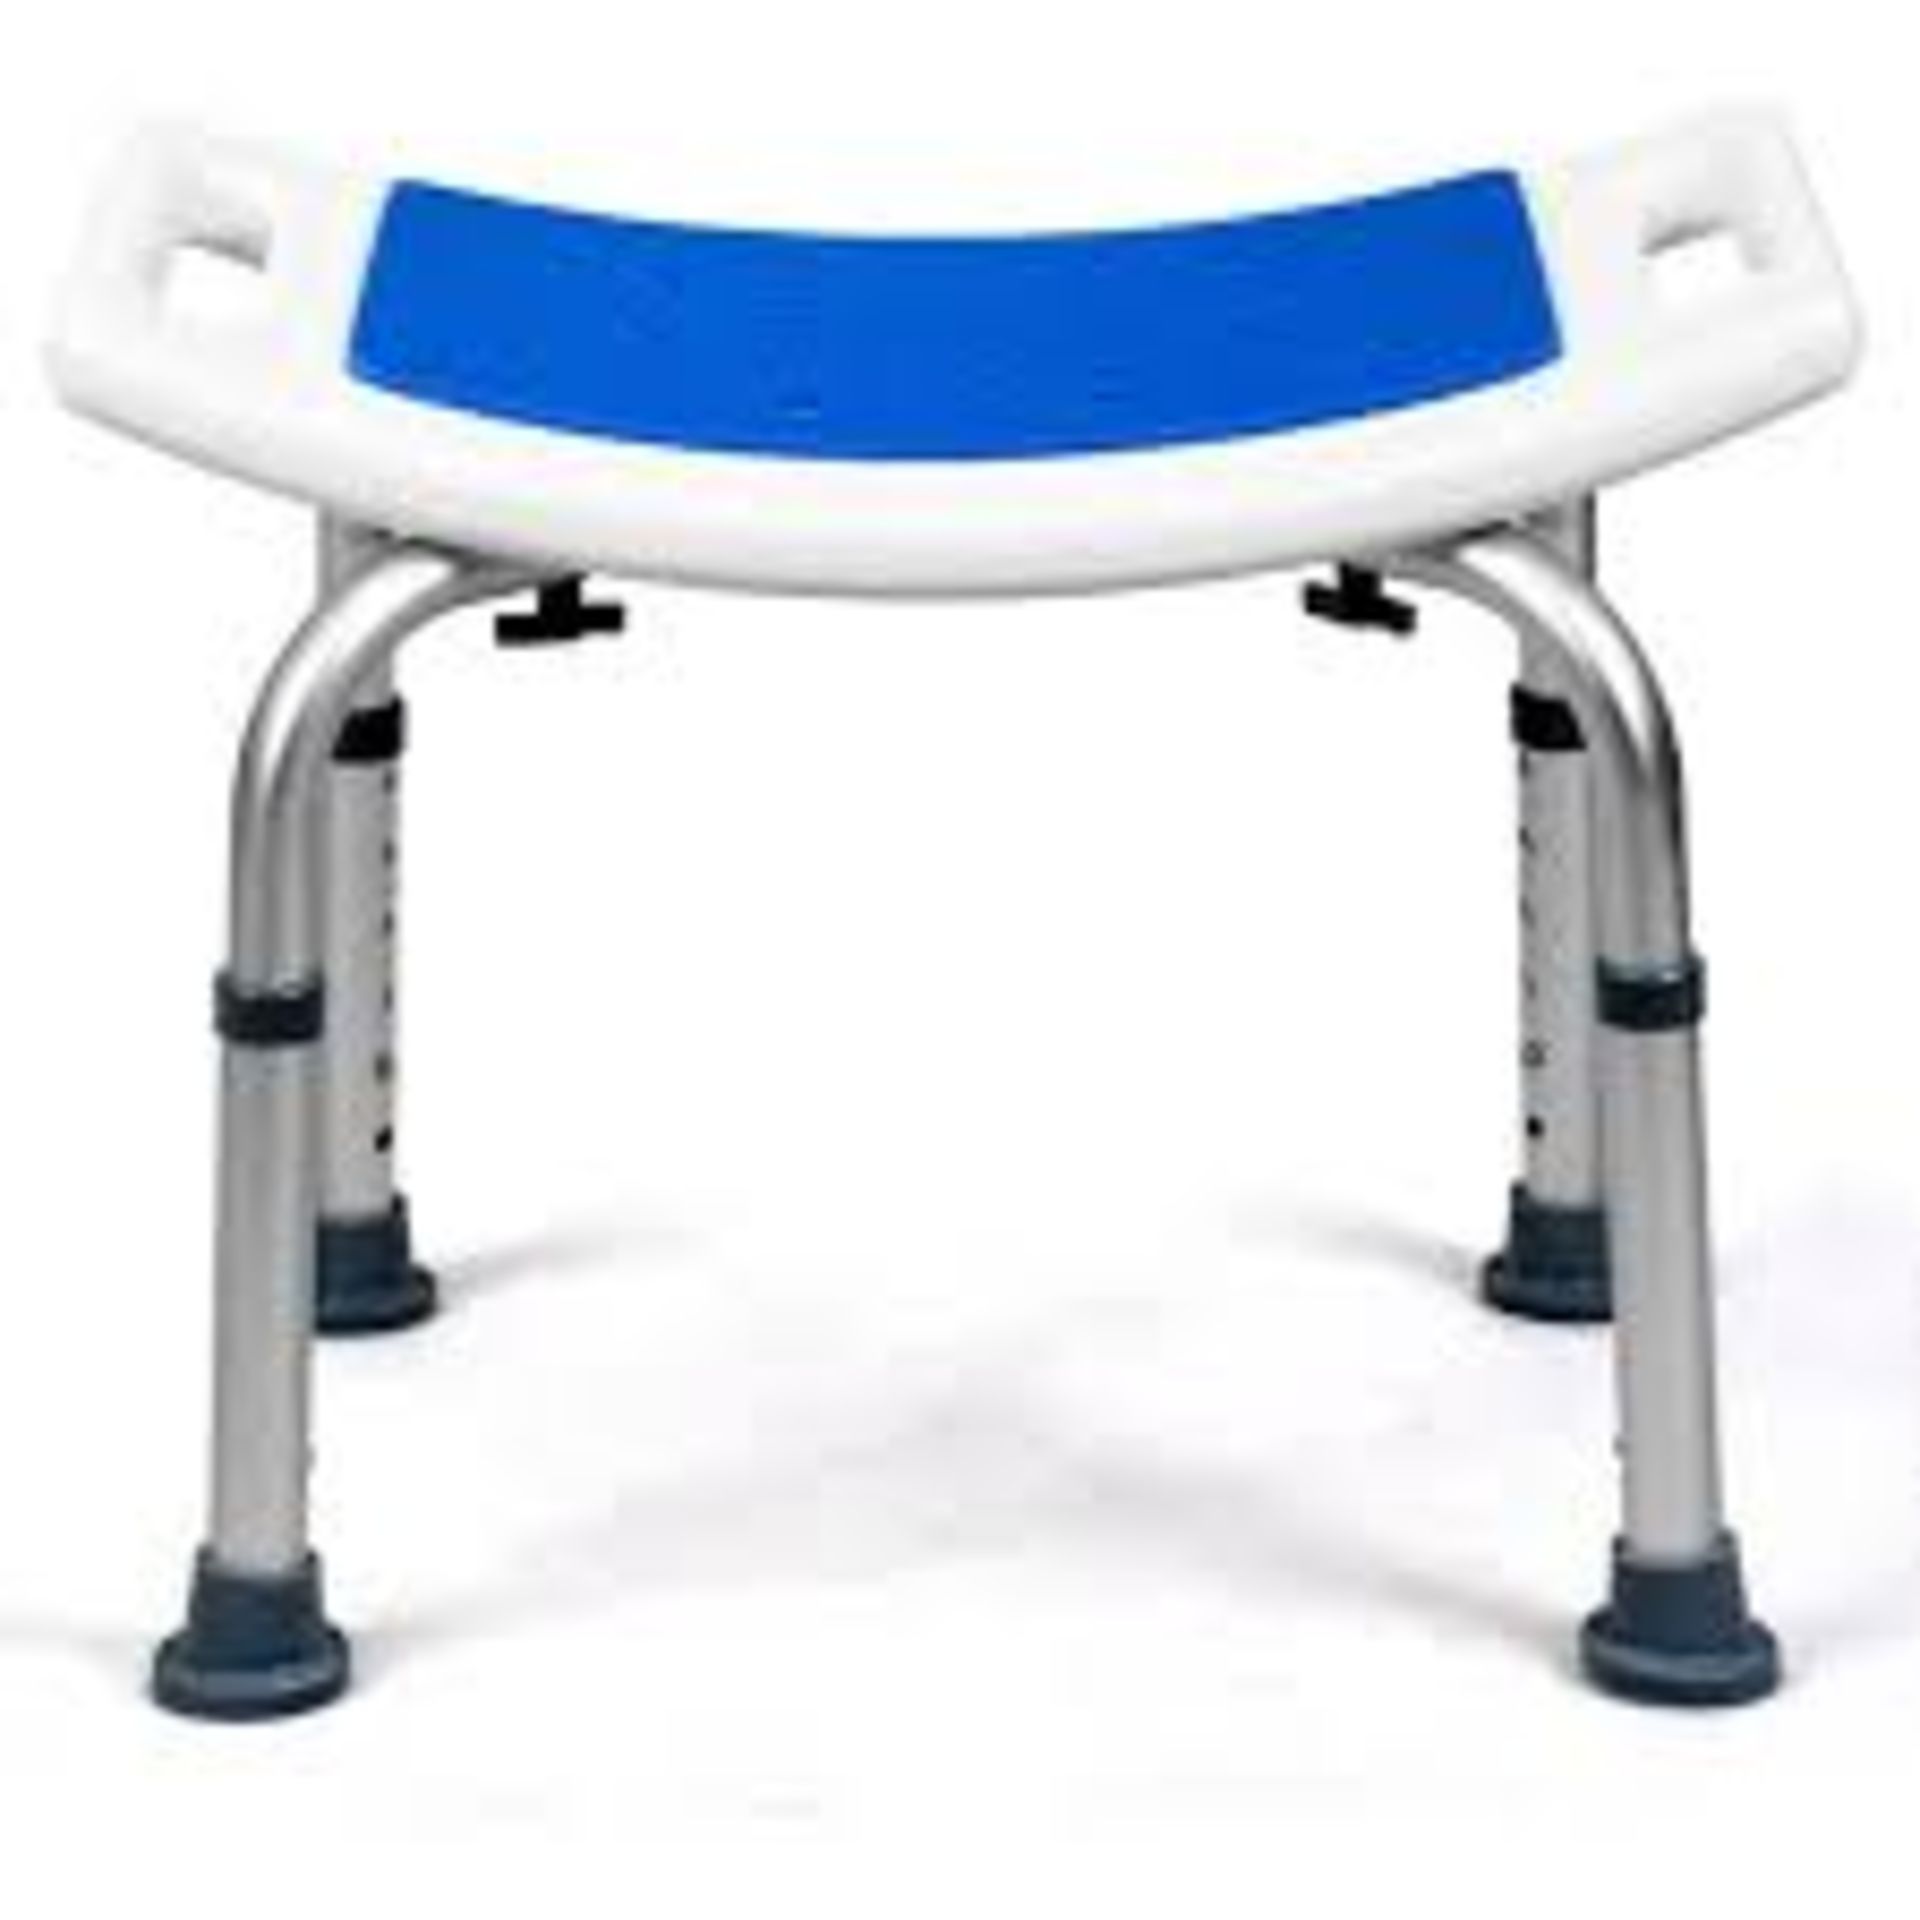 Height Adjustable Shower Stool. - R14.14. Make your daily routine more comfortable and much safer